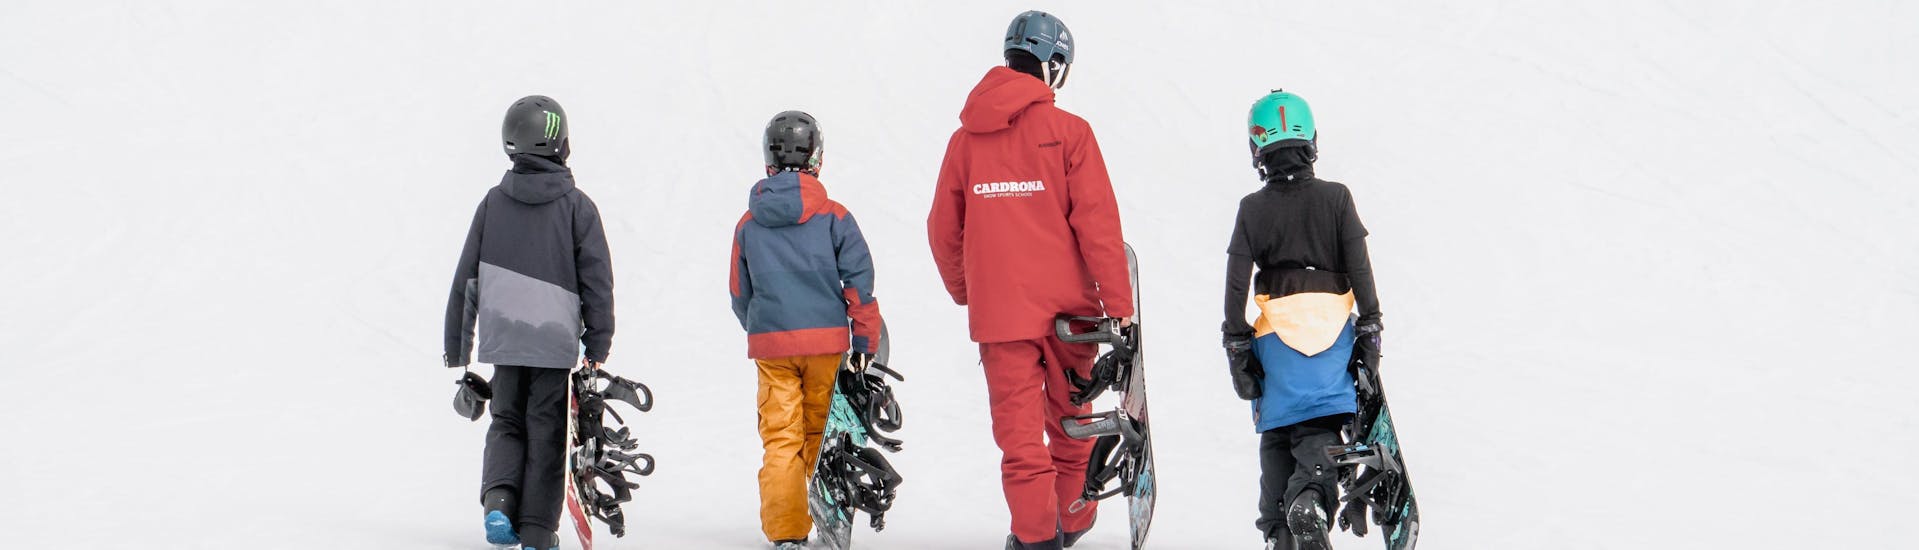 Snowboarding Lessons for Kids (7-17 years) - All Levels.